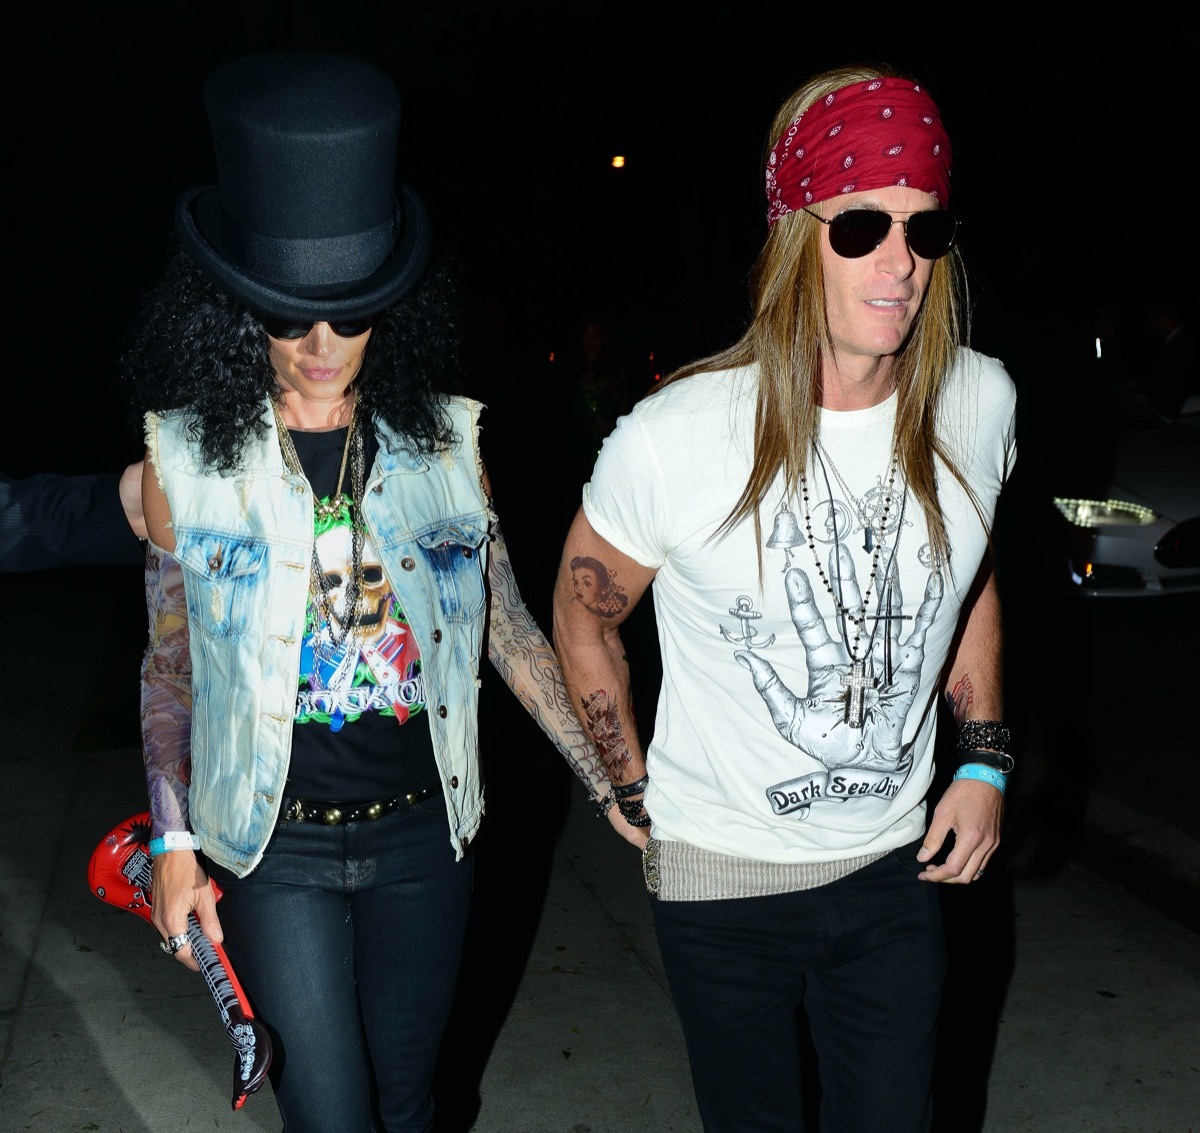 Cindy Crawford and Rande Gerber dressed as Slash and Axl Rose on Halloween